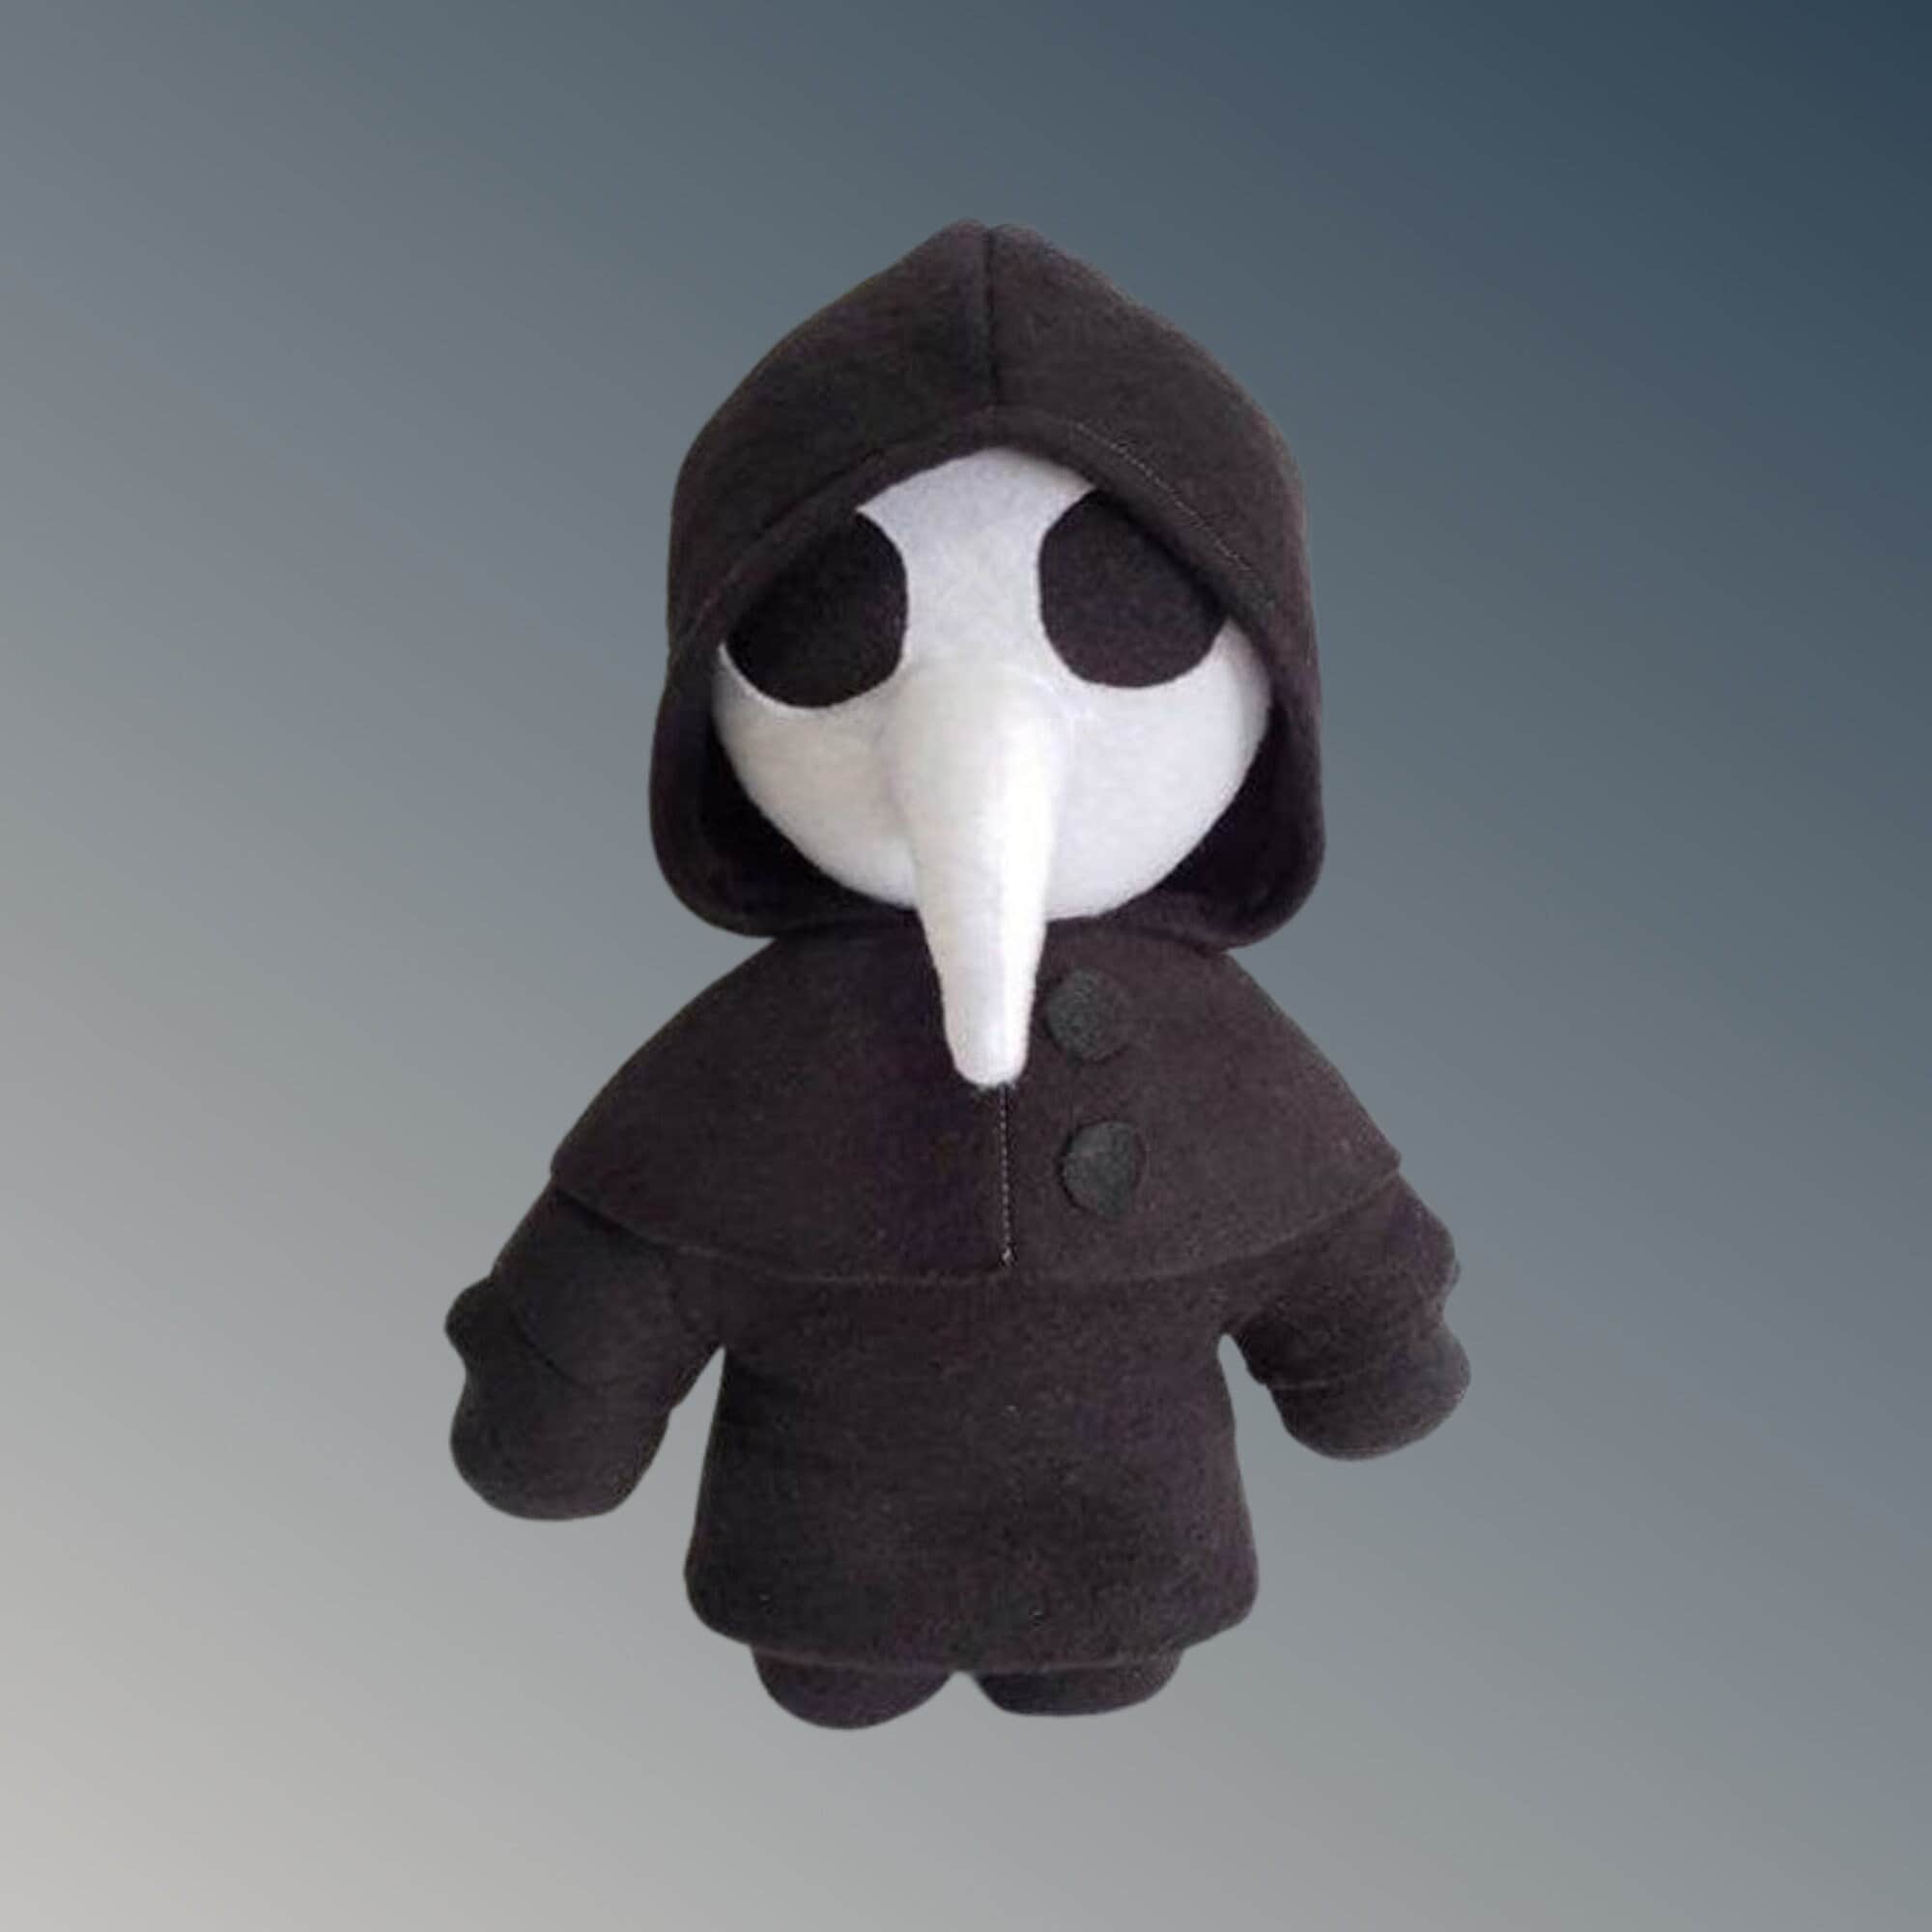 SCP 173 Containment Breach, plush toy, Halloween gift